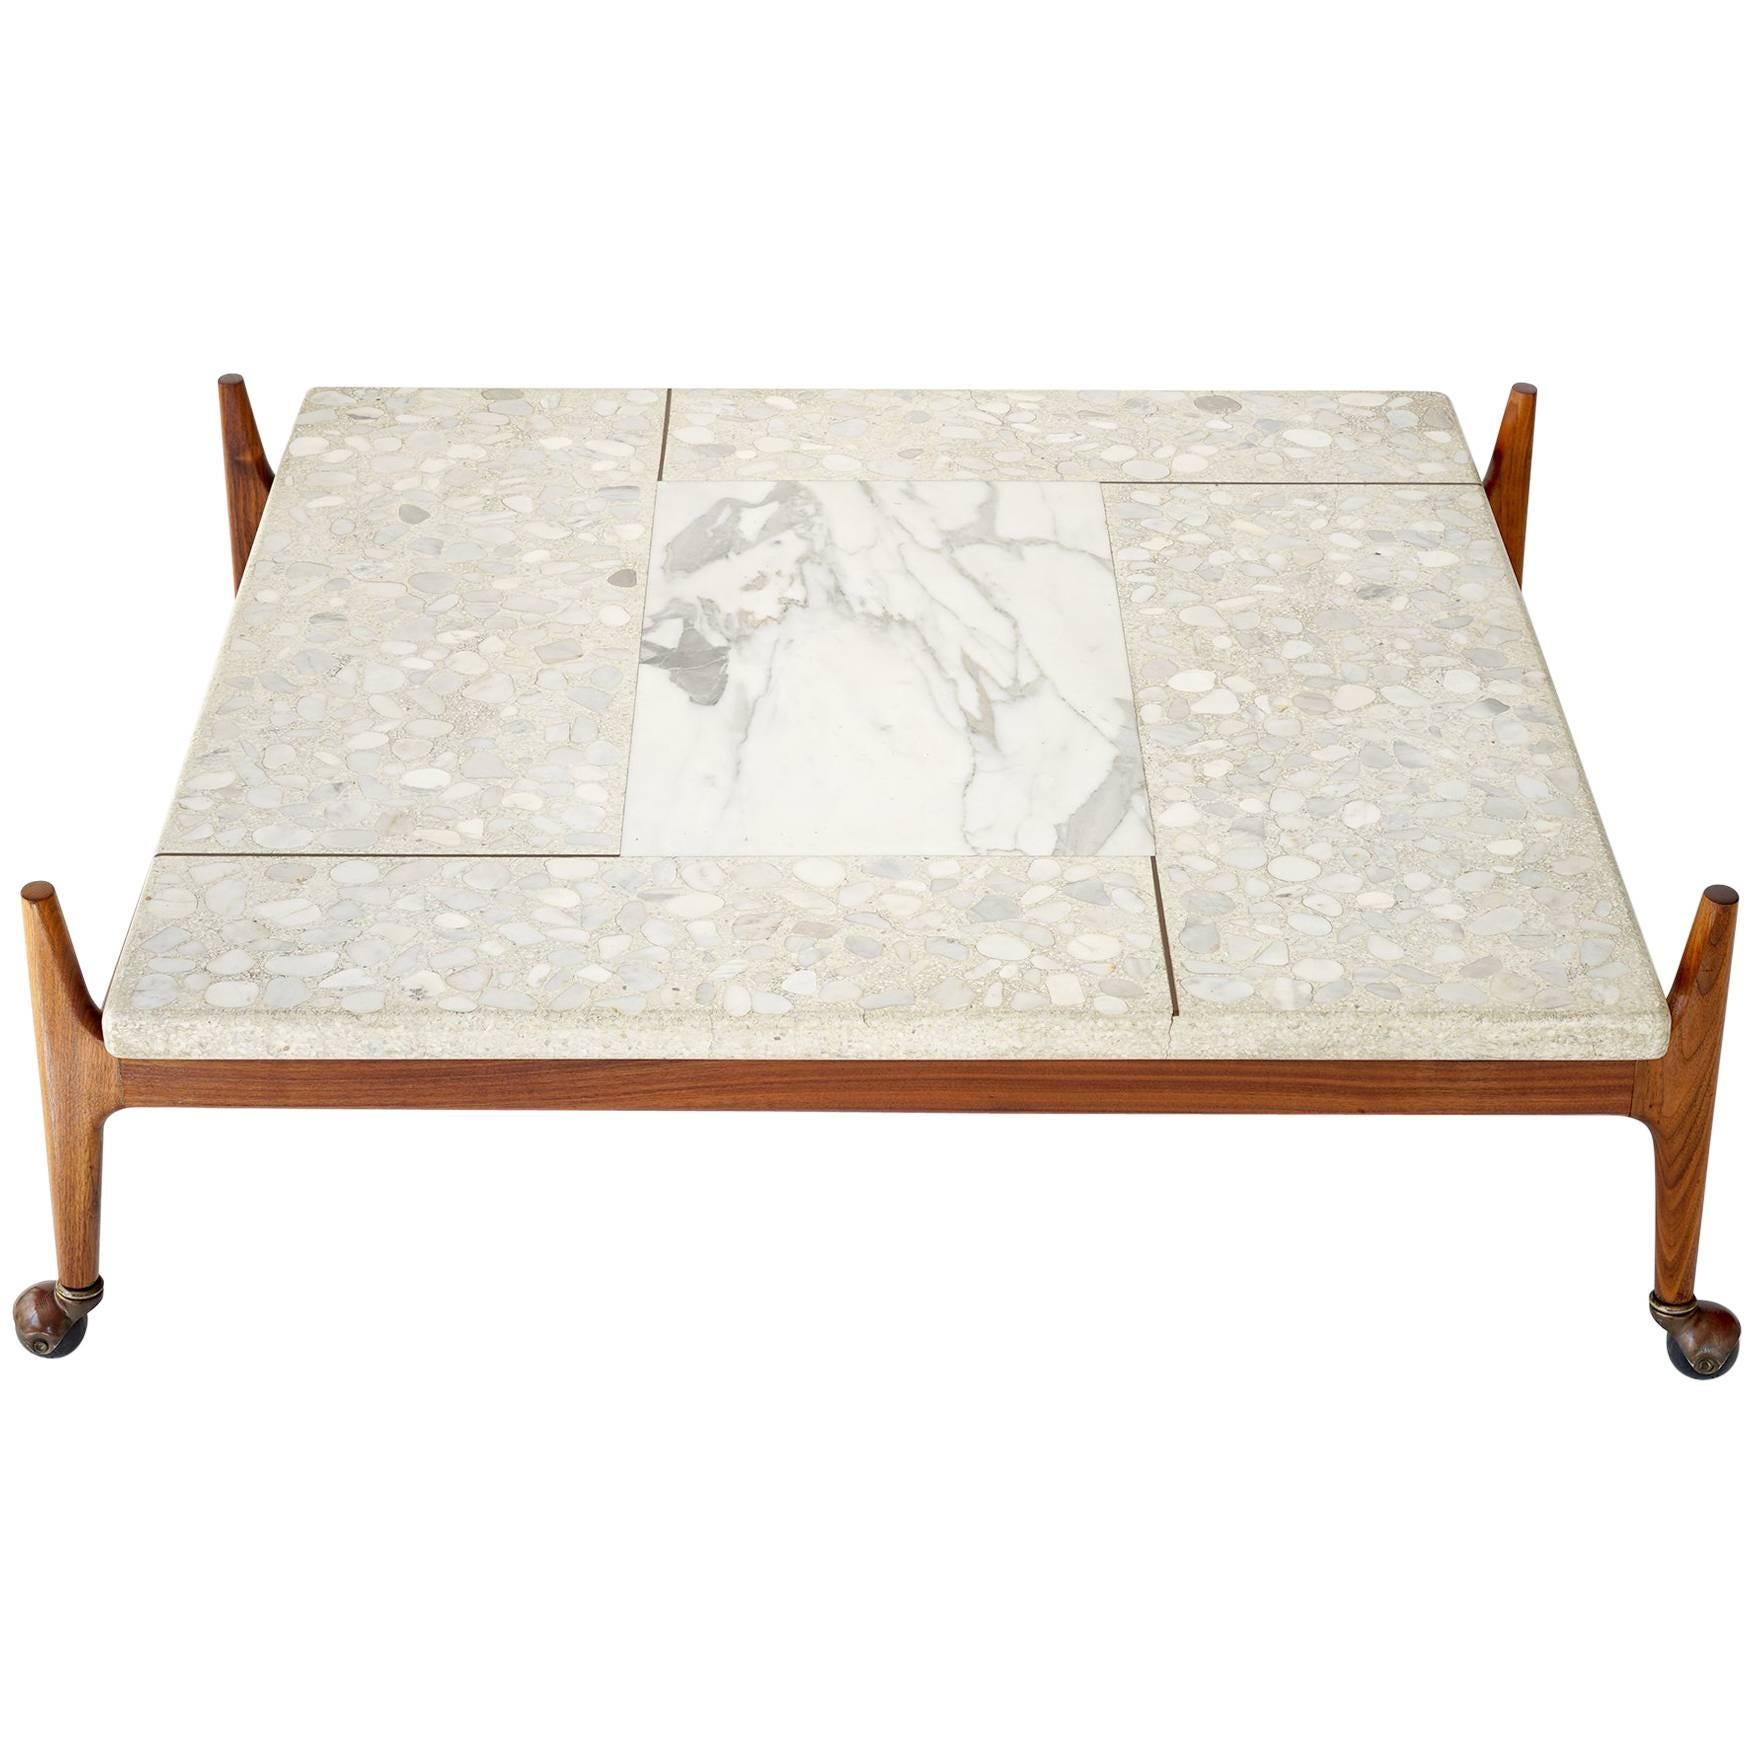 Terrazzo and Walnut Coffee Table by Harvey Probber